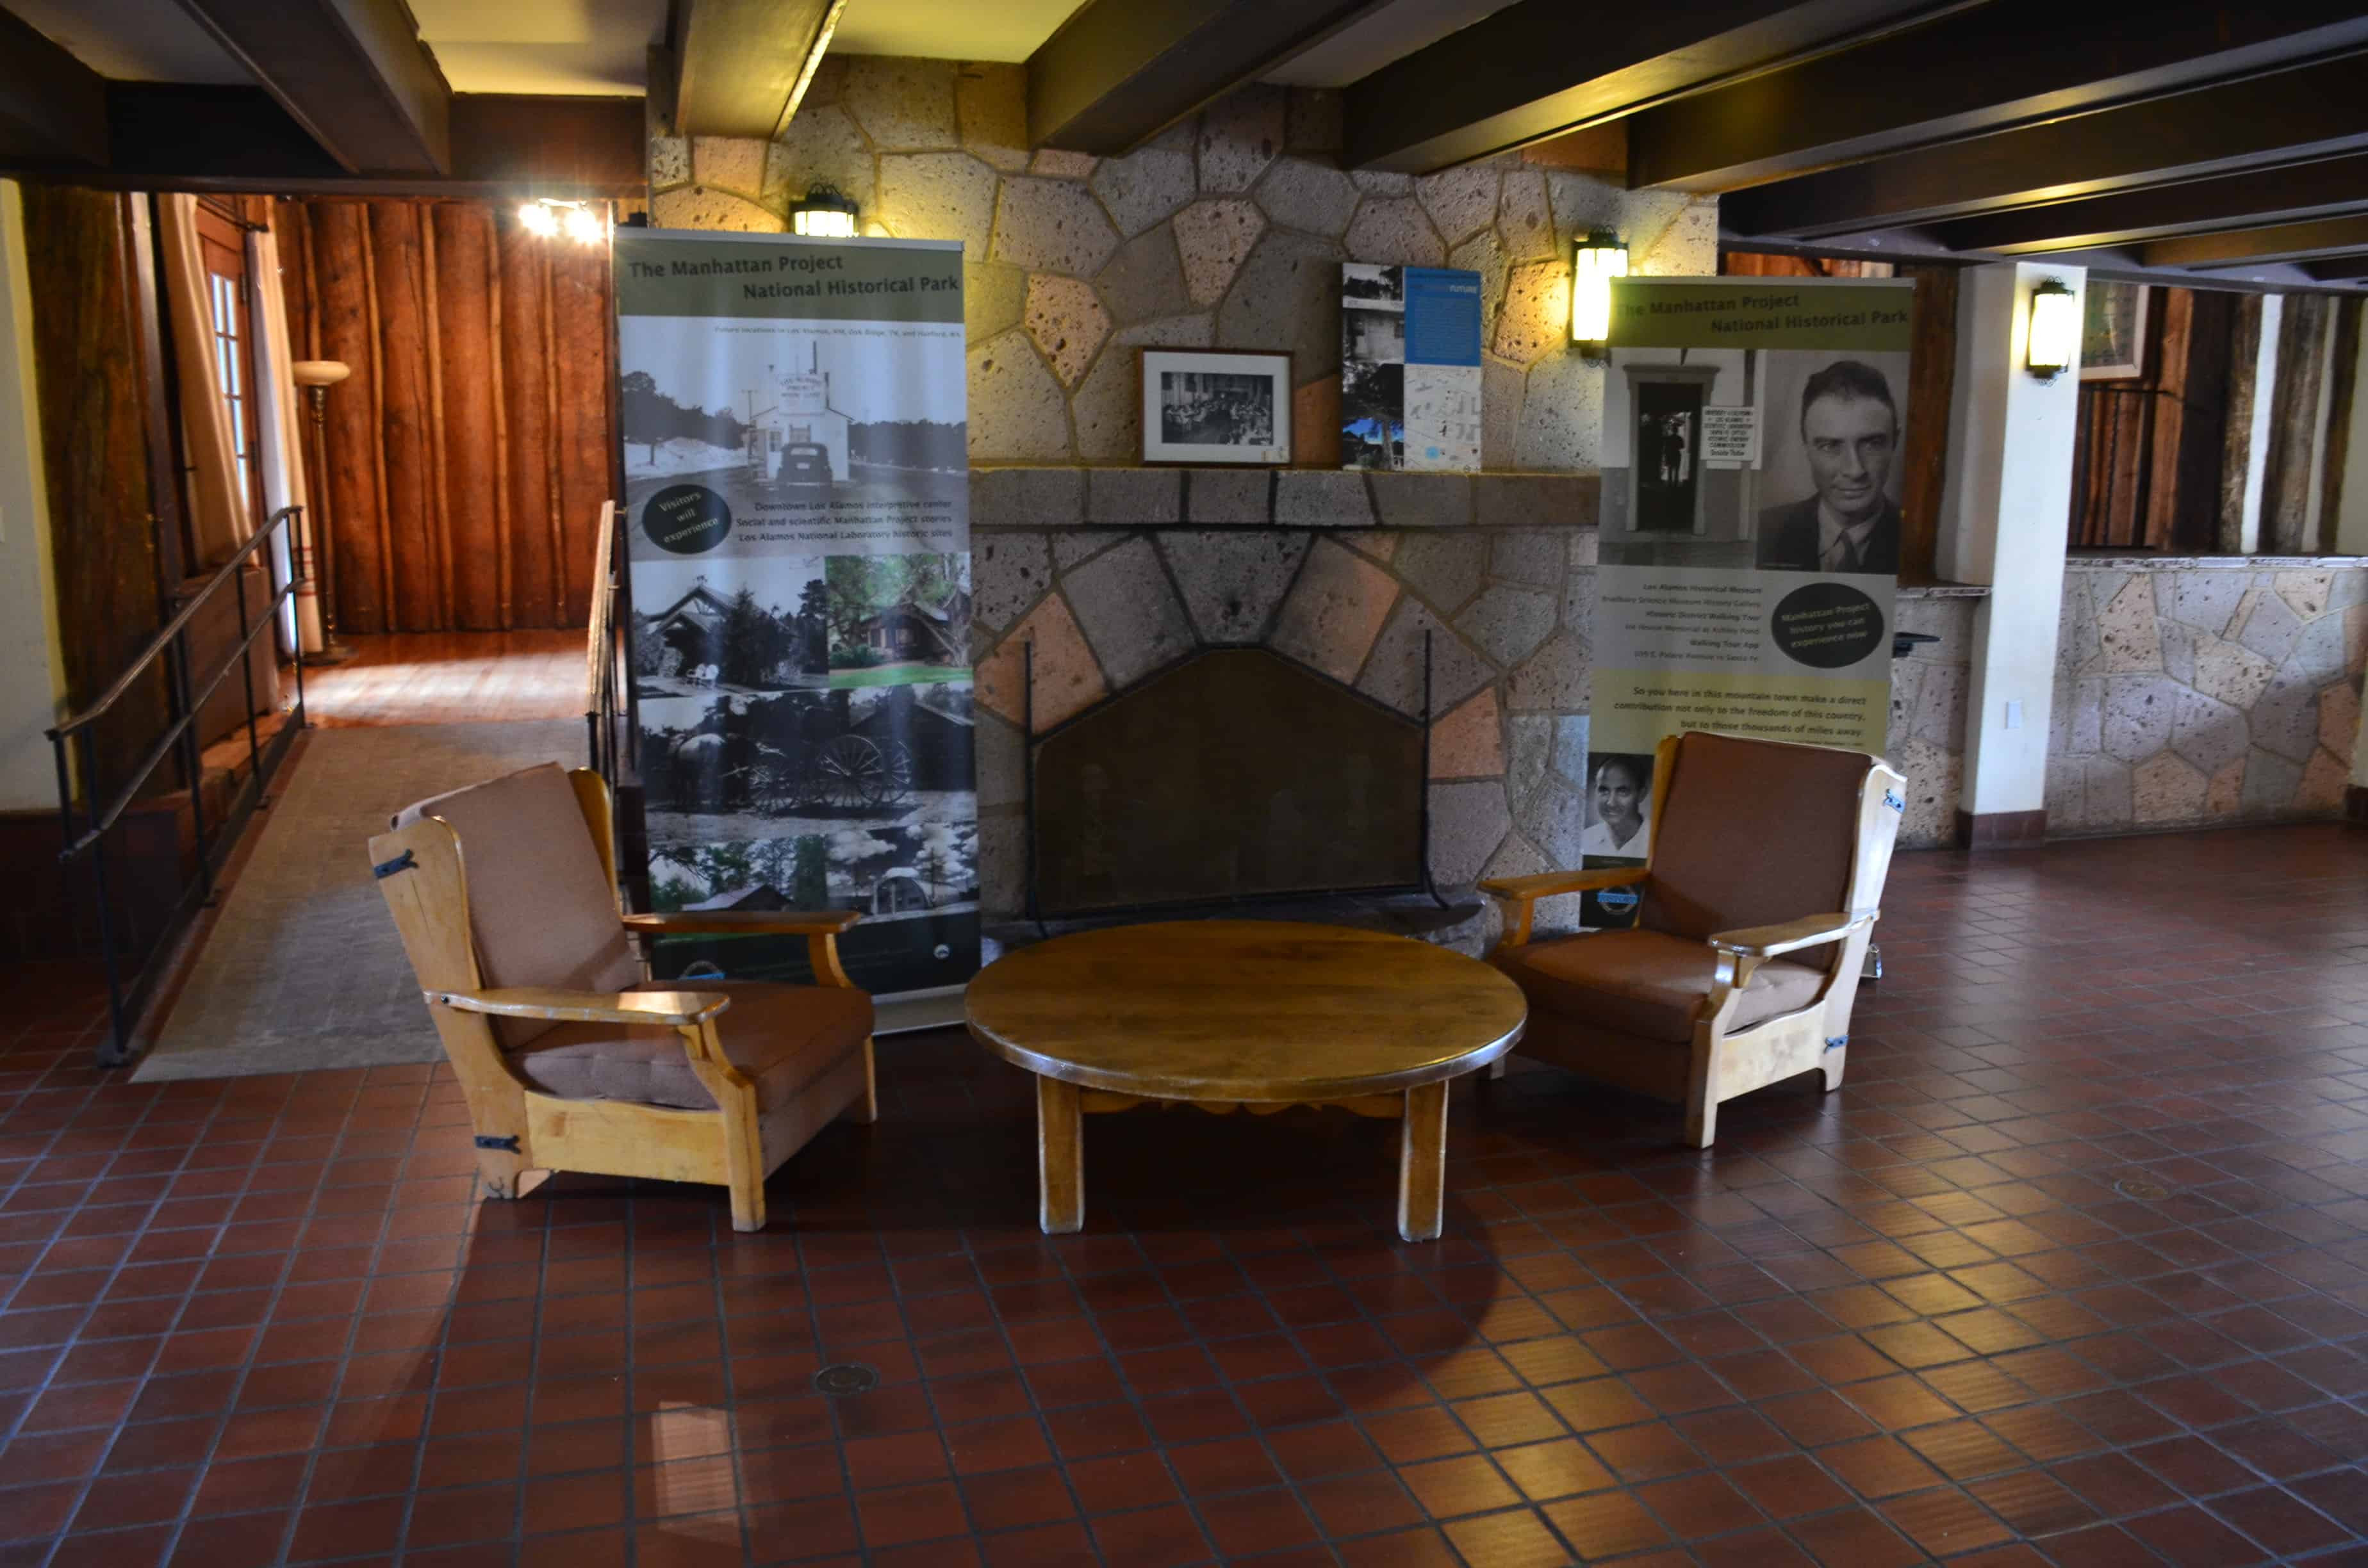 Fuller Lodge at Manhattan Project National Historical Park in Los Alamos, New Mexico